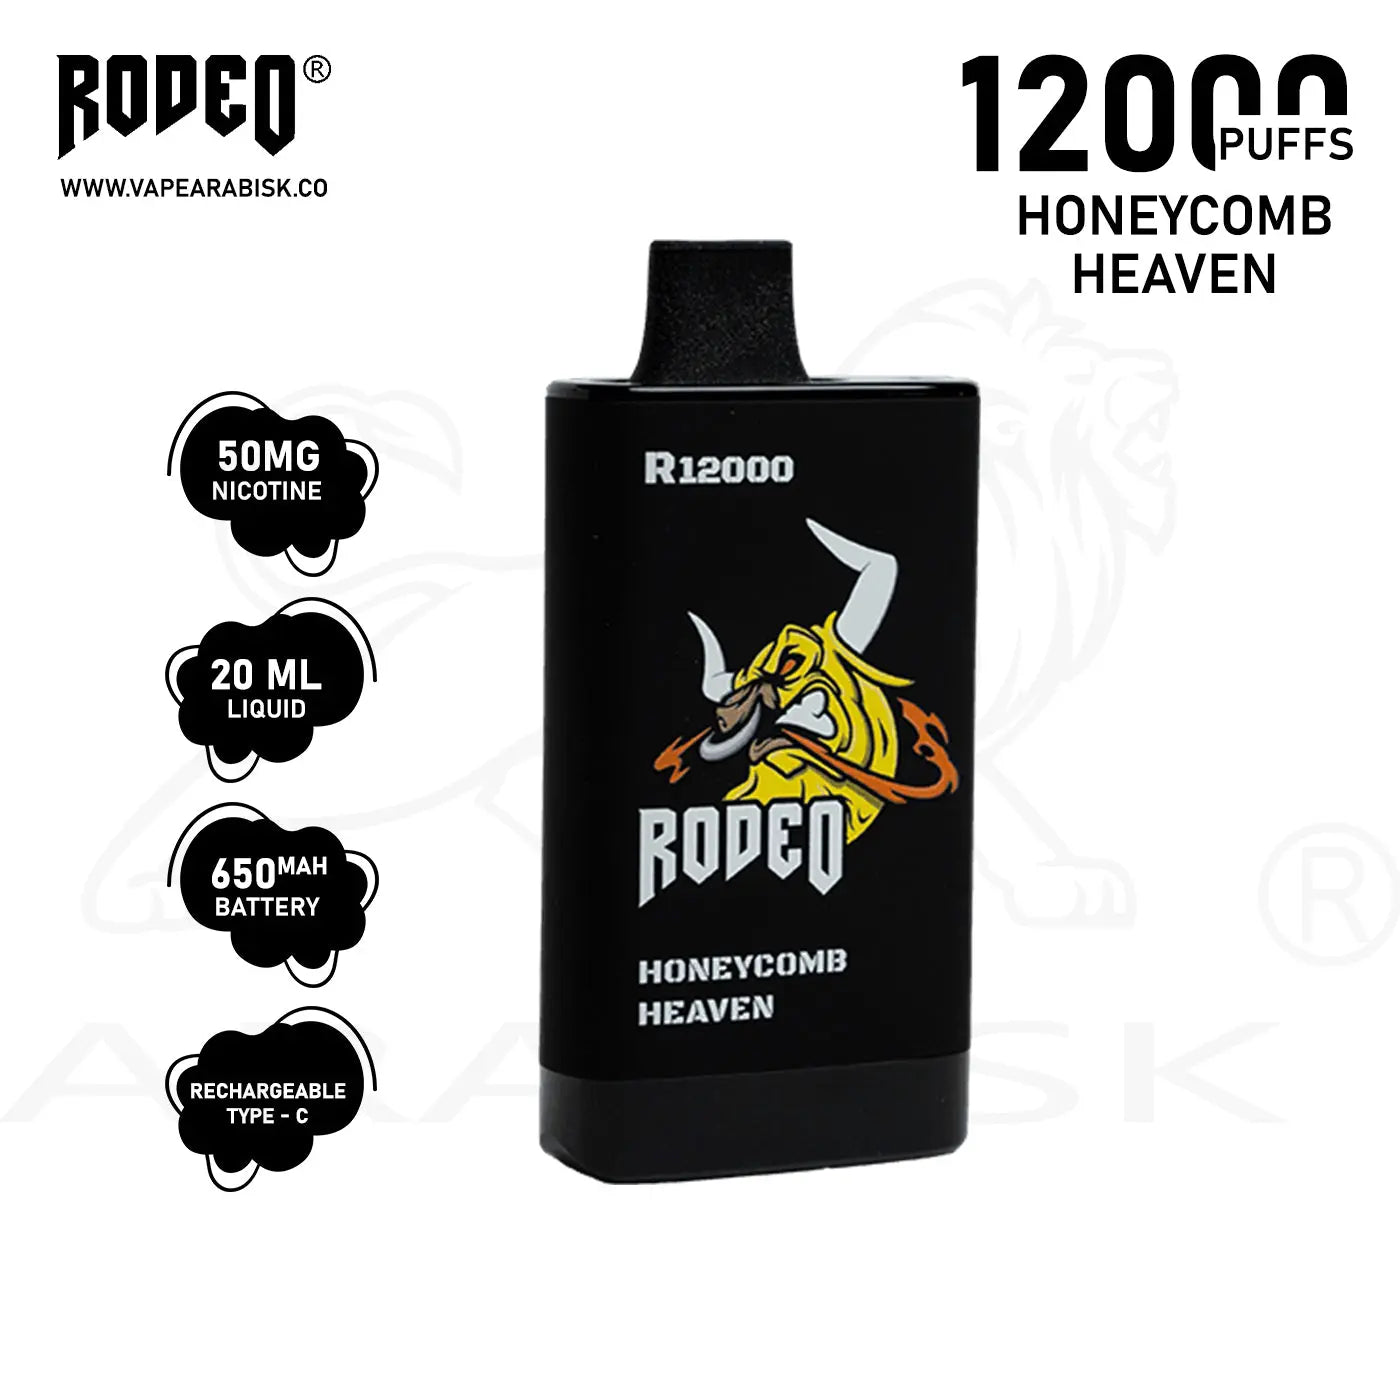 RODEO R 12000 PUFFS 50MG - HONEYCOMB HEAVEN RODEO